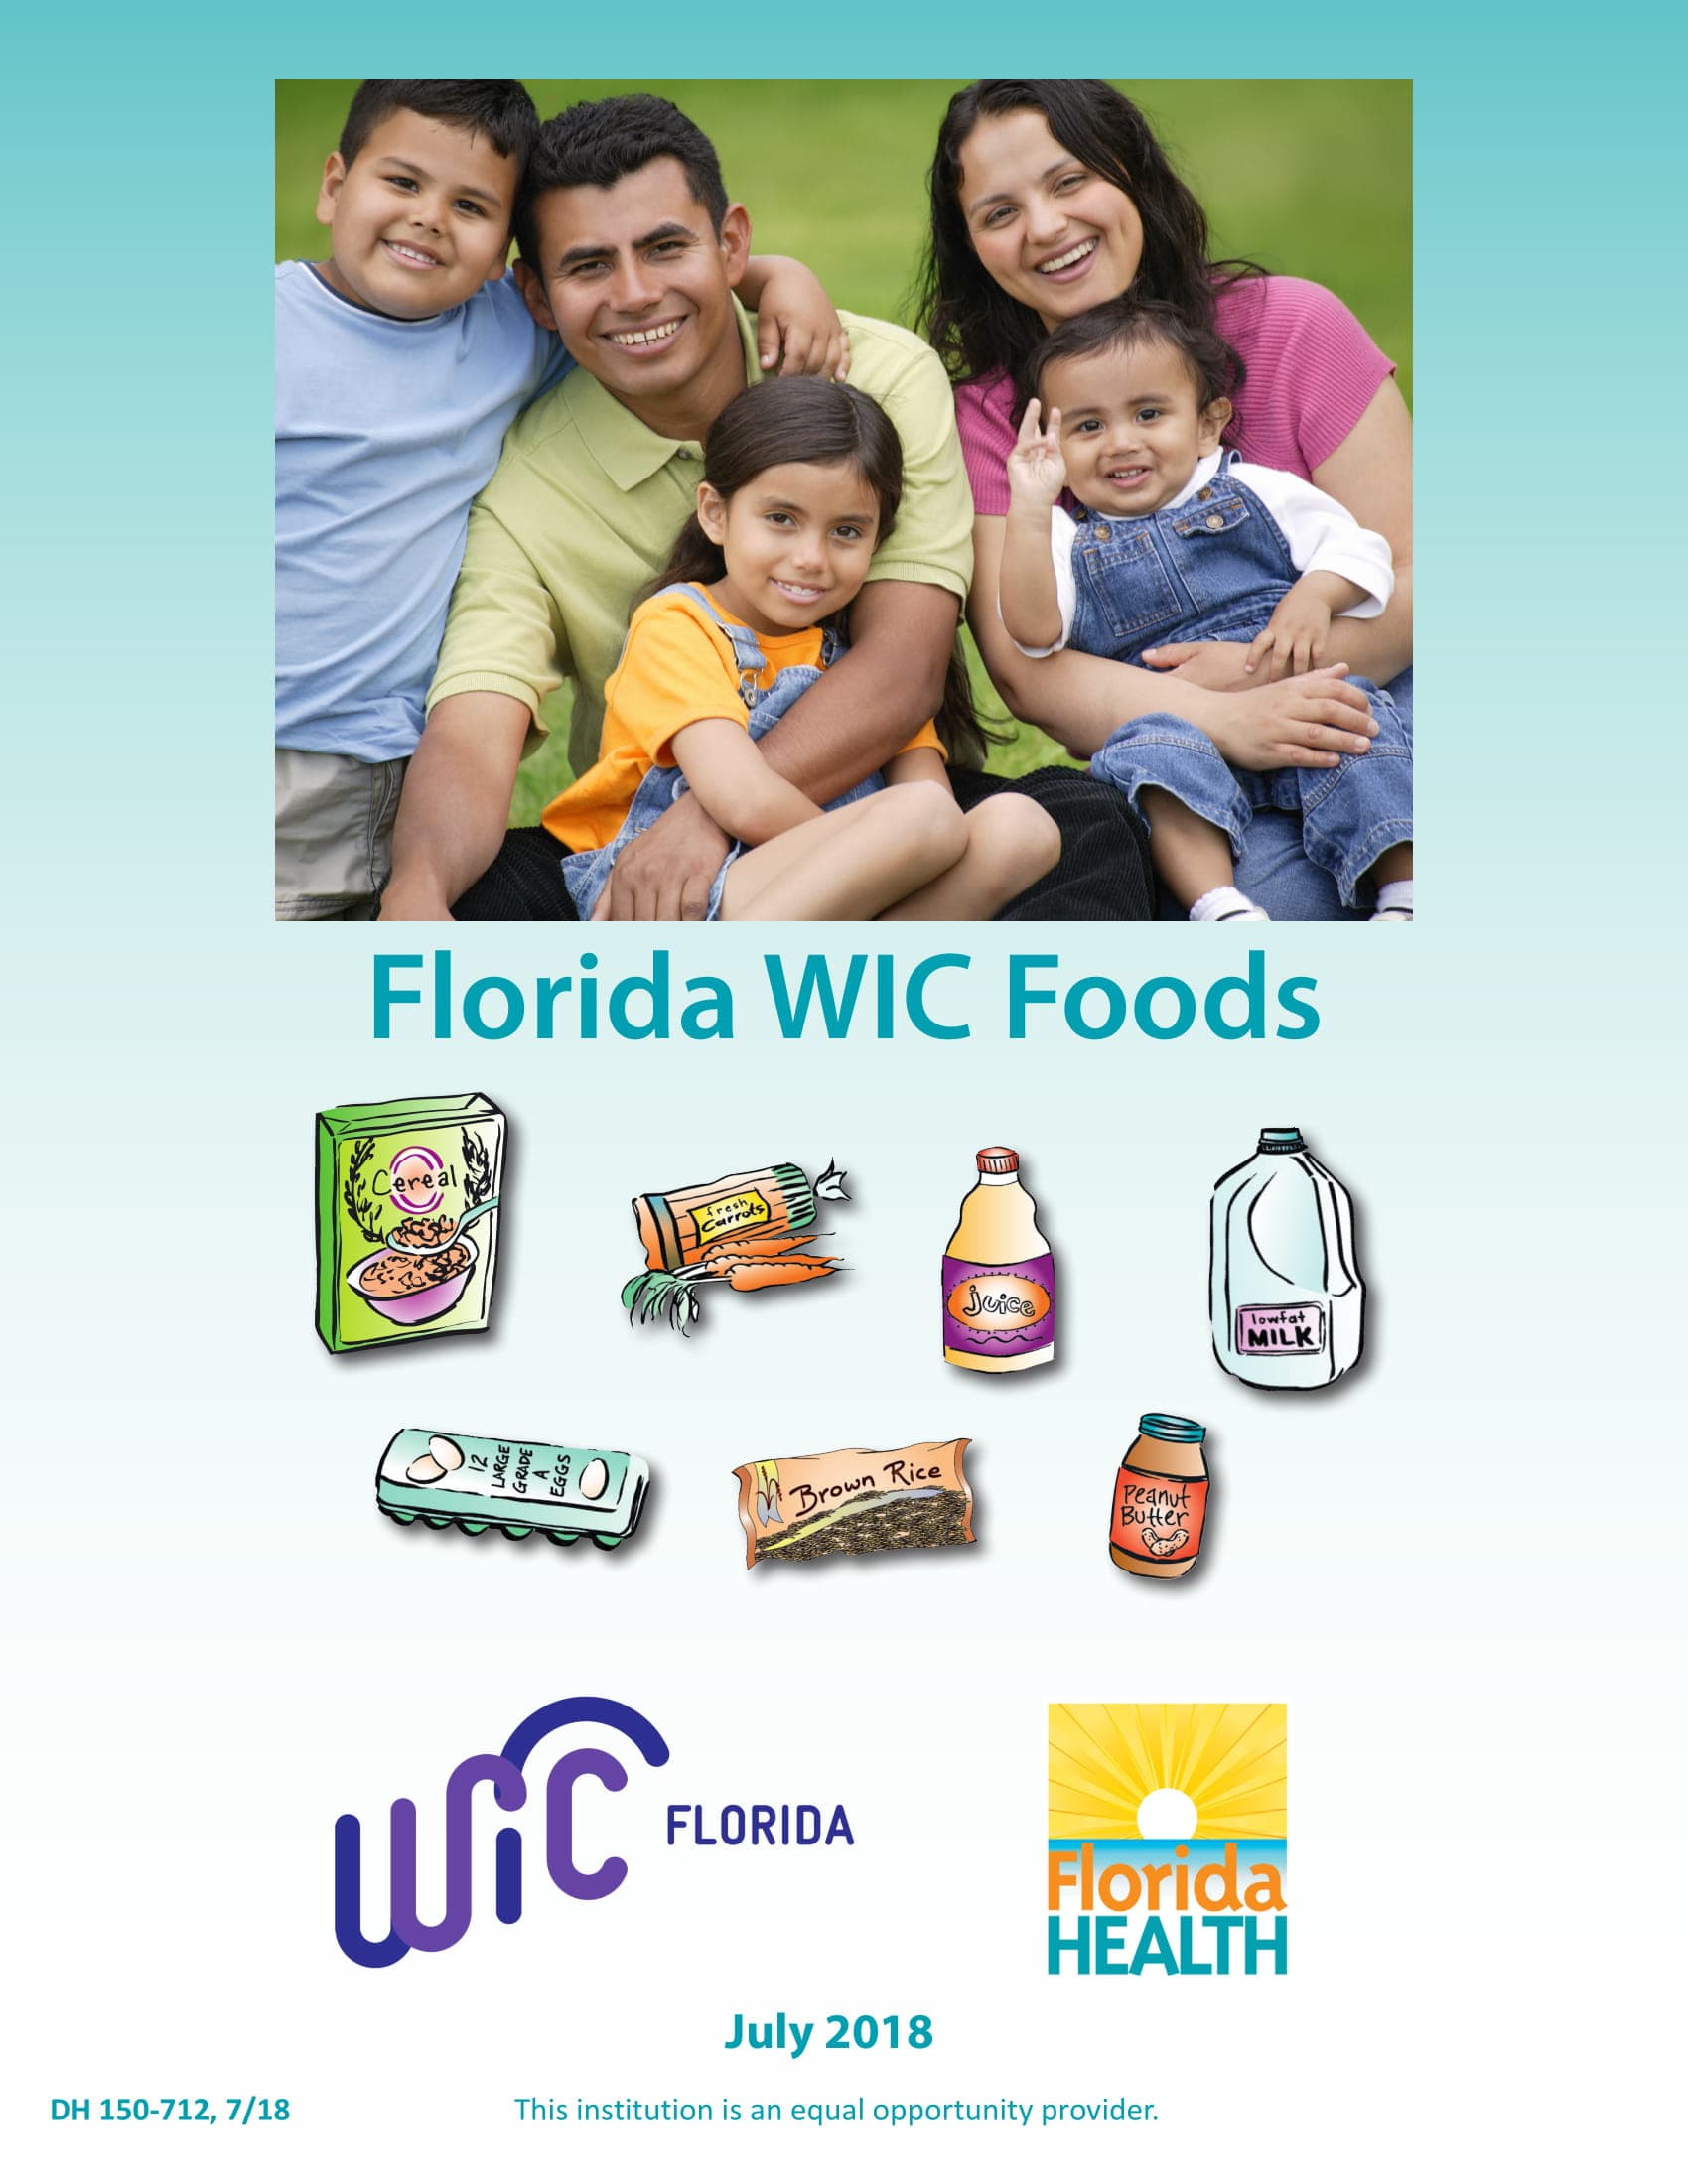 wic approved foods at walmart mississippi